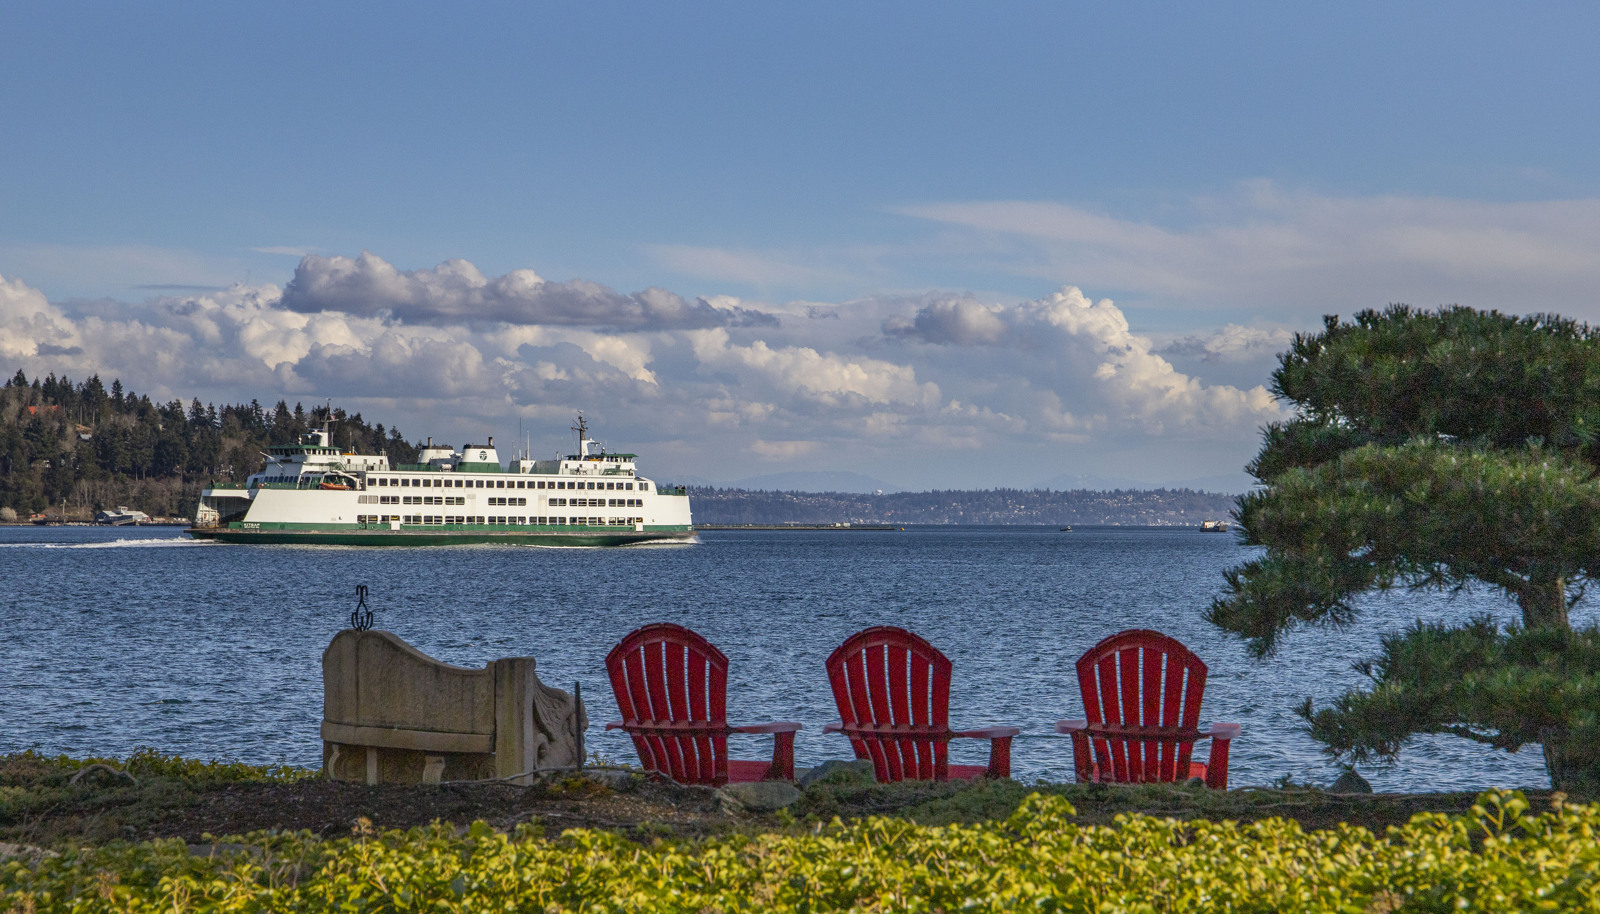 Watch the ferries glide by day and night.